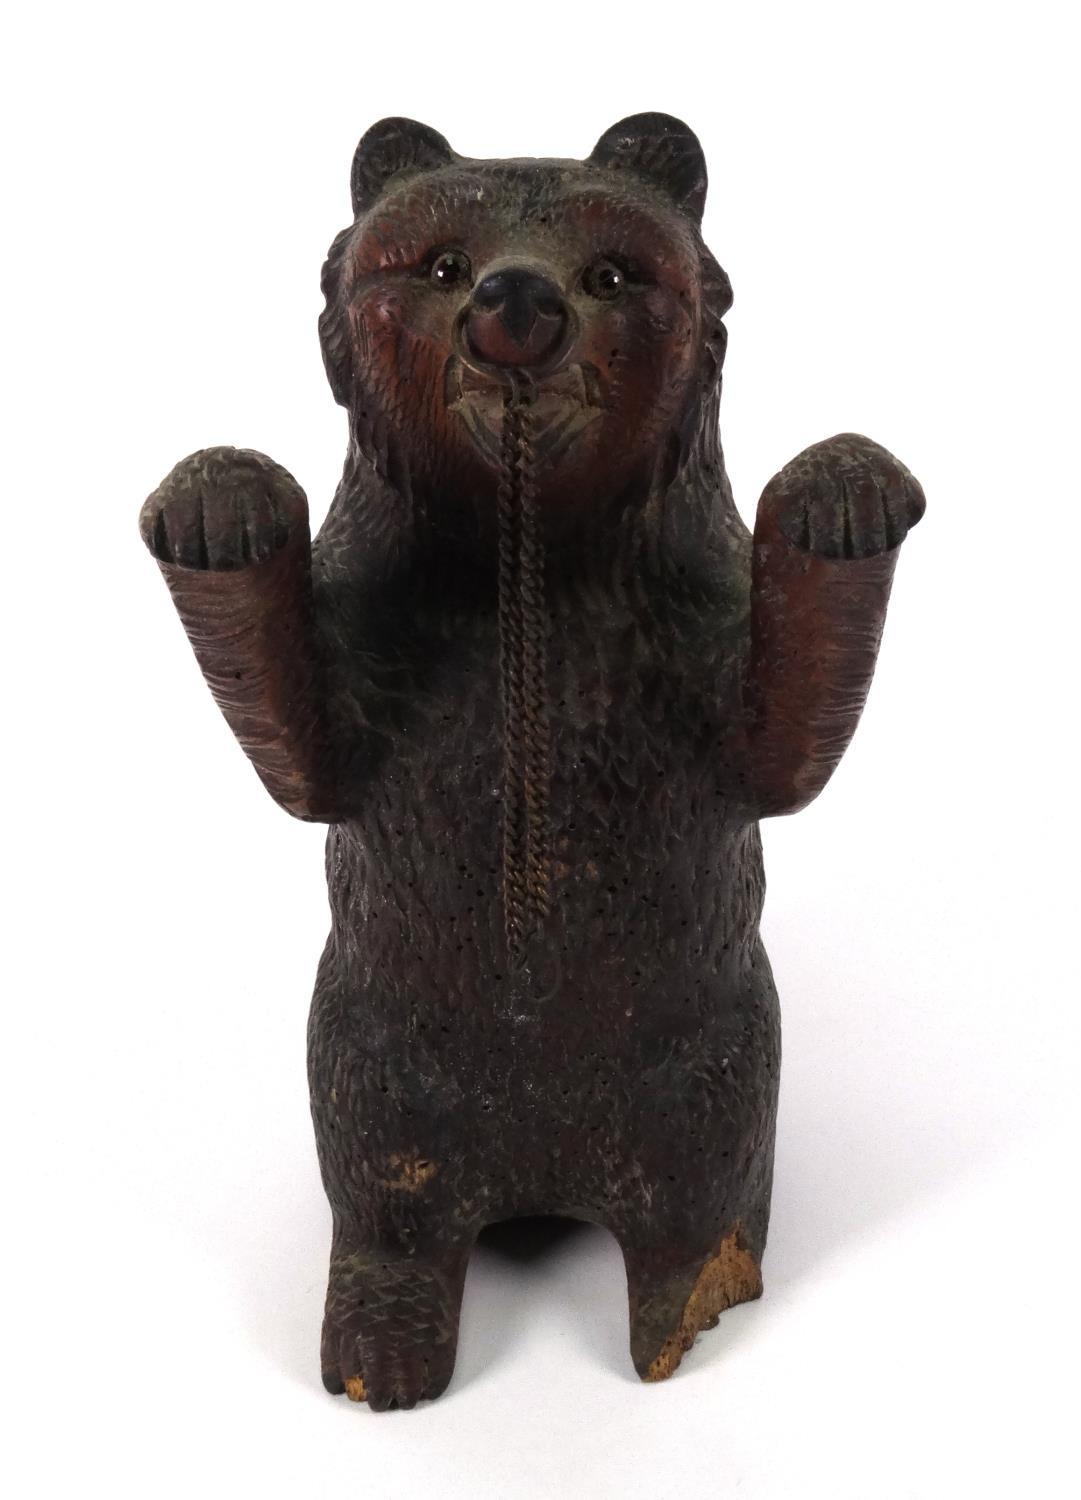 Black Forest carved wooden standing bear with beaded glass eyes, 30cm high - Image 2 of 5